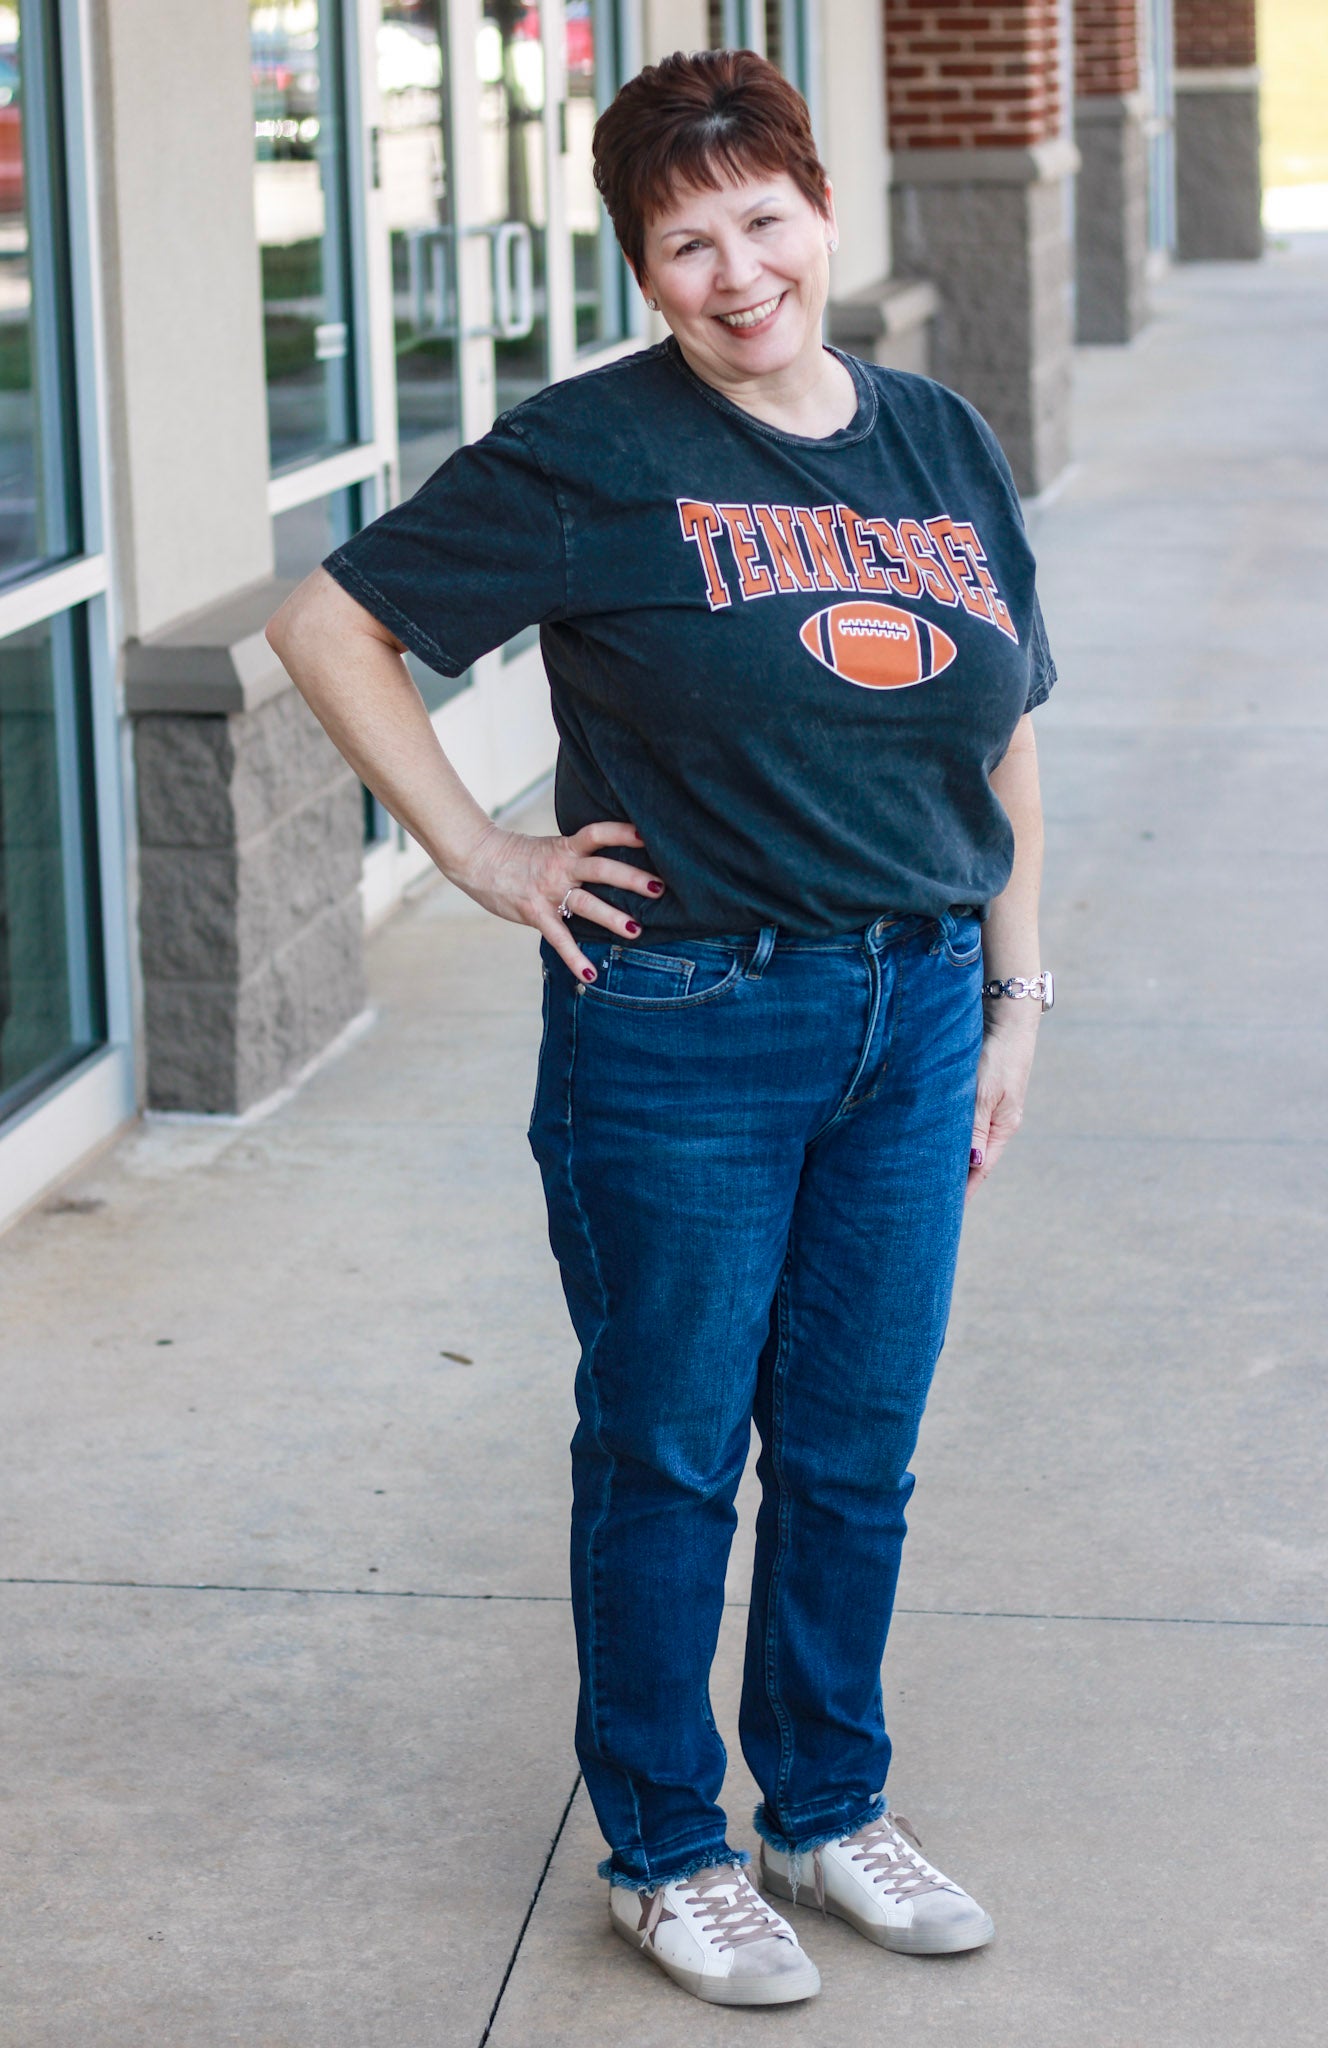 Taking On Tennessee Football Graphic Tee in Black